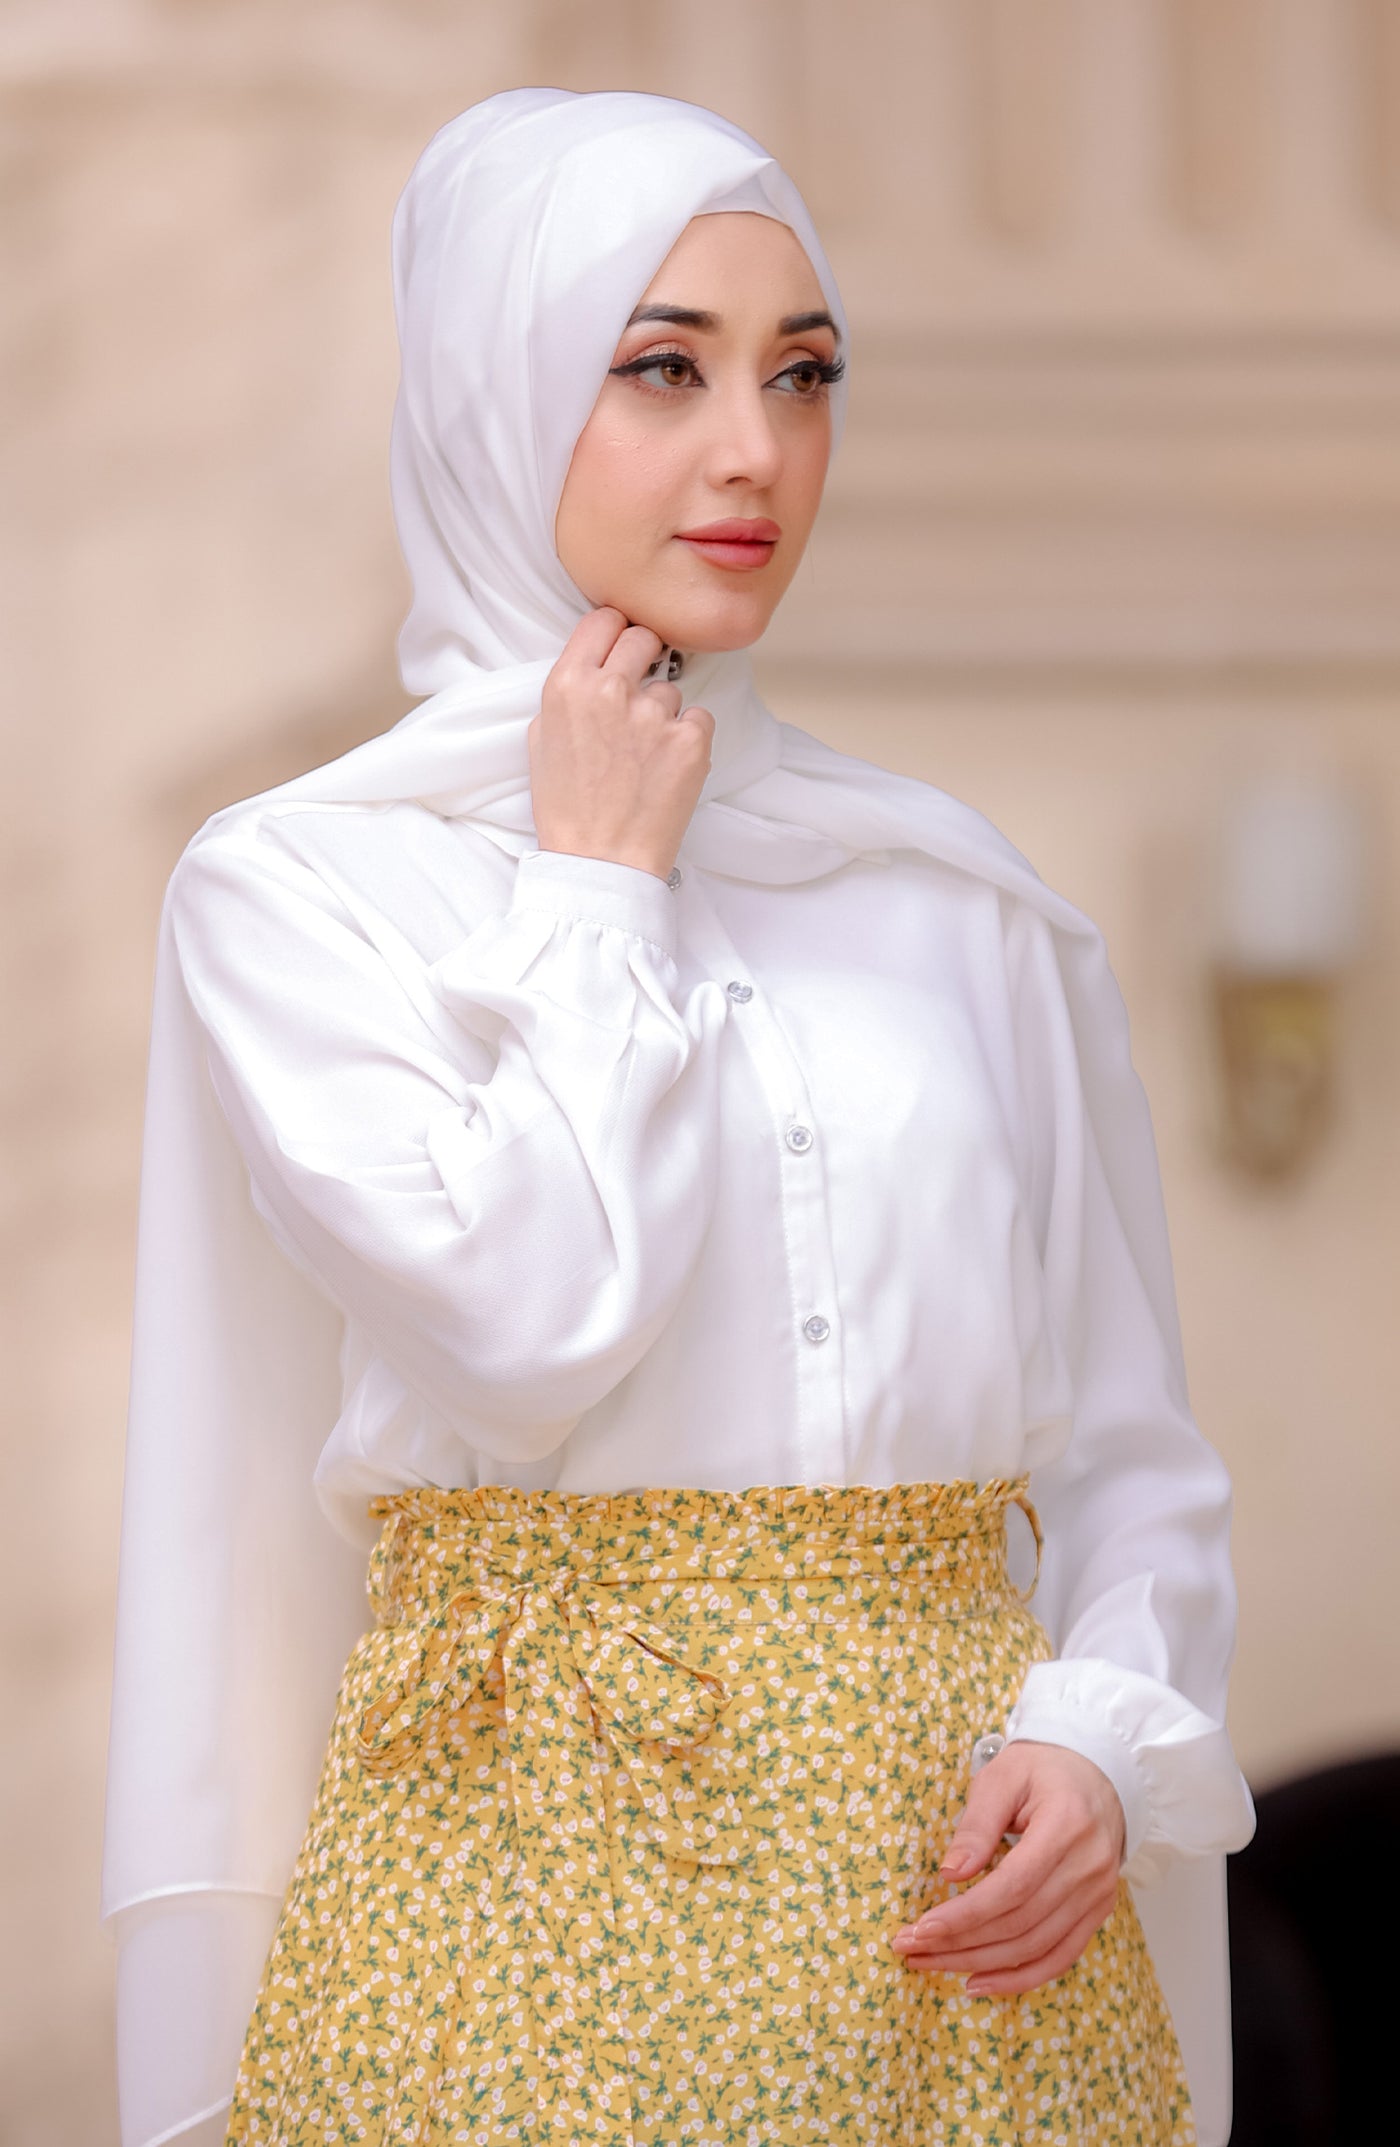 women skirt with hijab and top by malbus